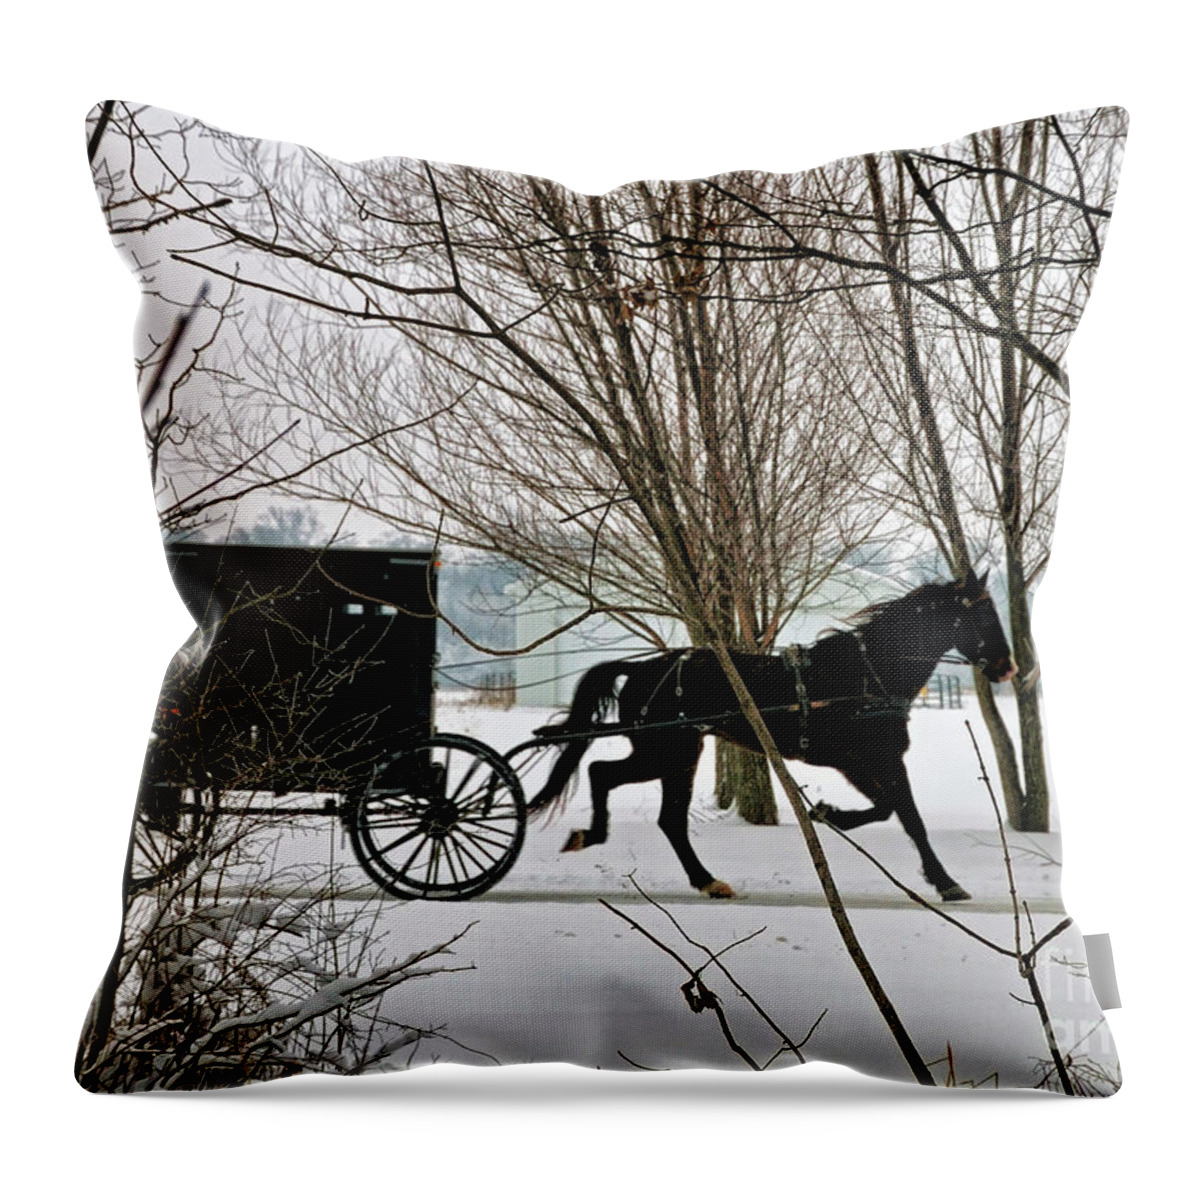 Winter Throw Pillow featuring the photograph Winter Buggy by David Arment